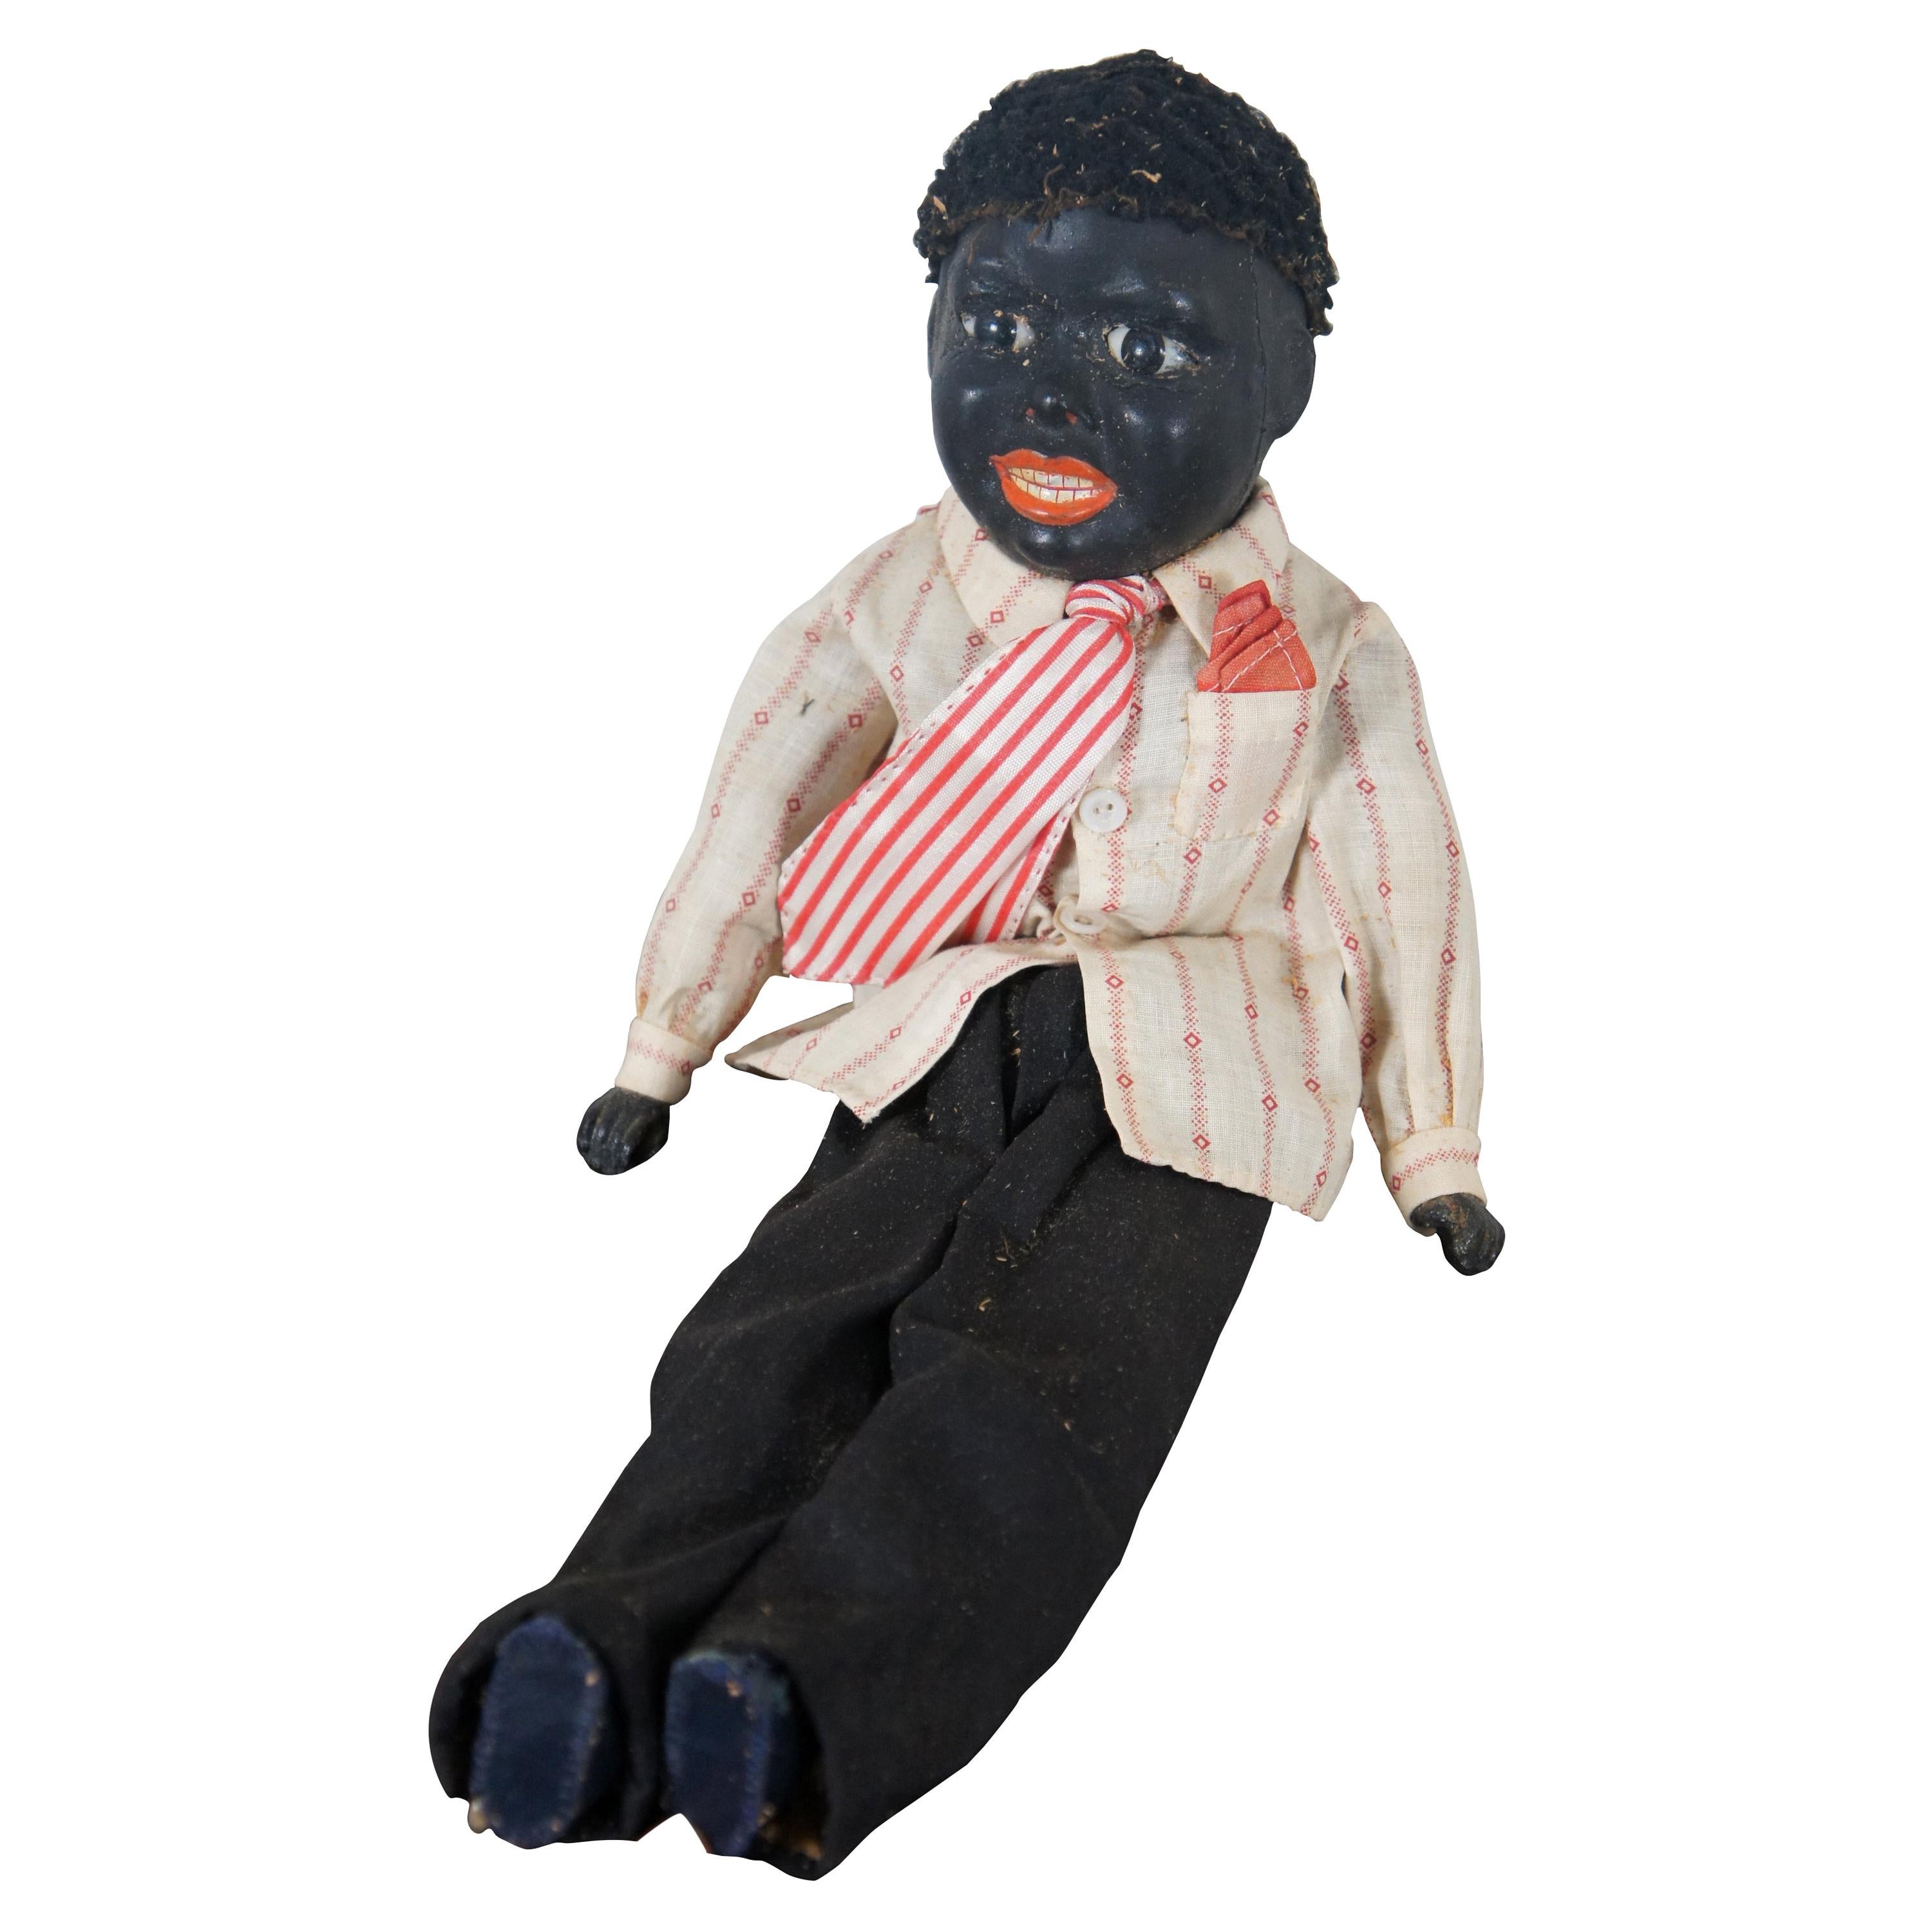 Antique German Bisque Black Ebony Young Boy Character Doll Cloth Body